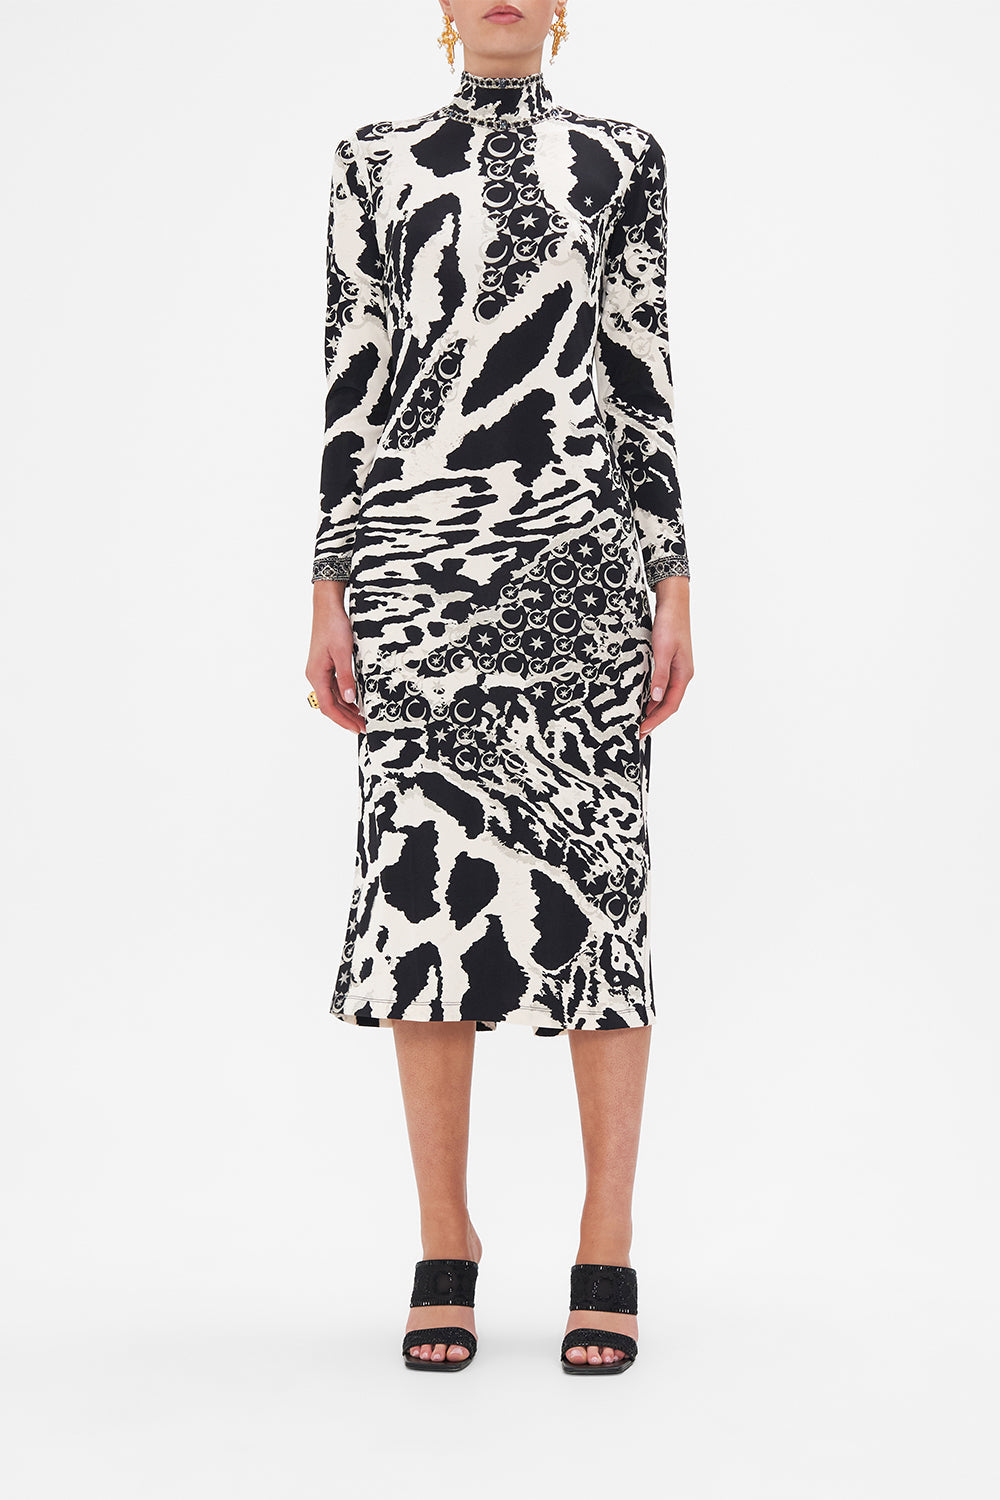 Front view of model wearing CAMILLA black and white jersey midi dress in Feline Fantasy print